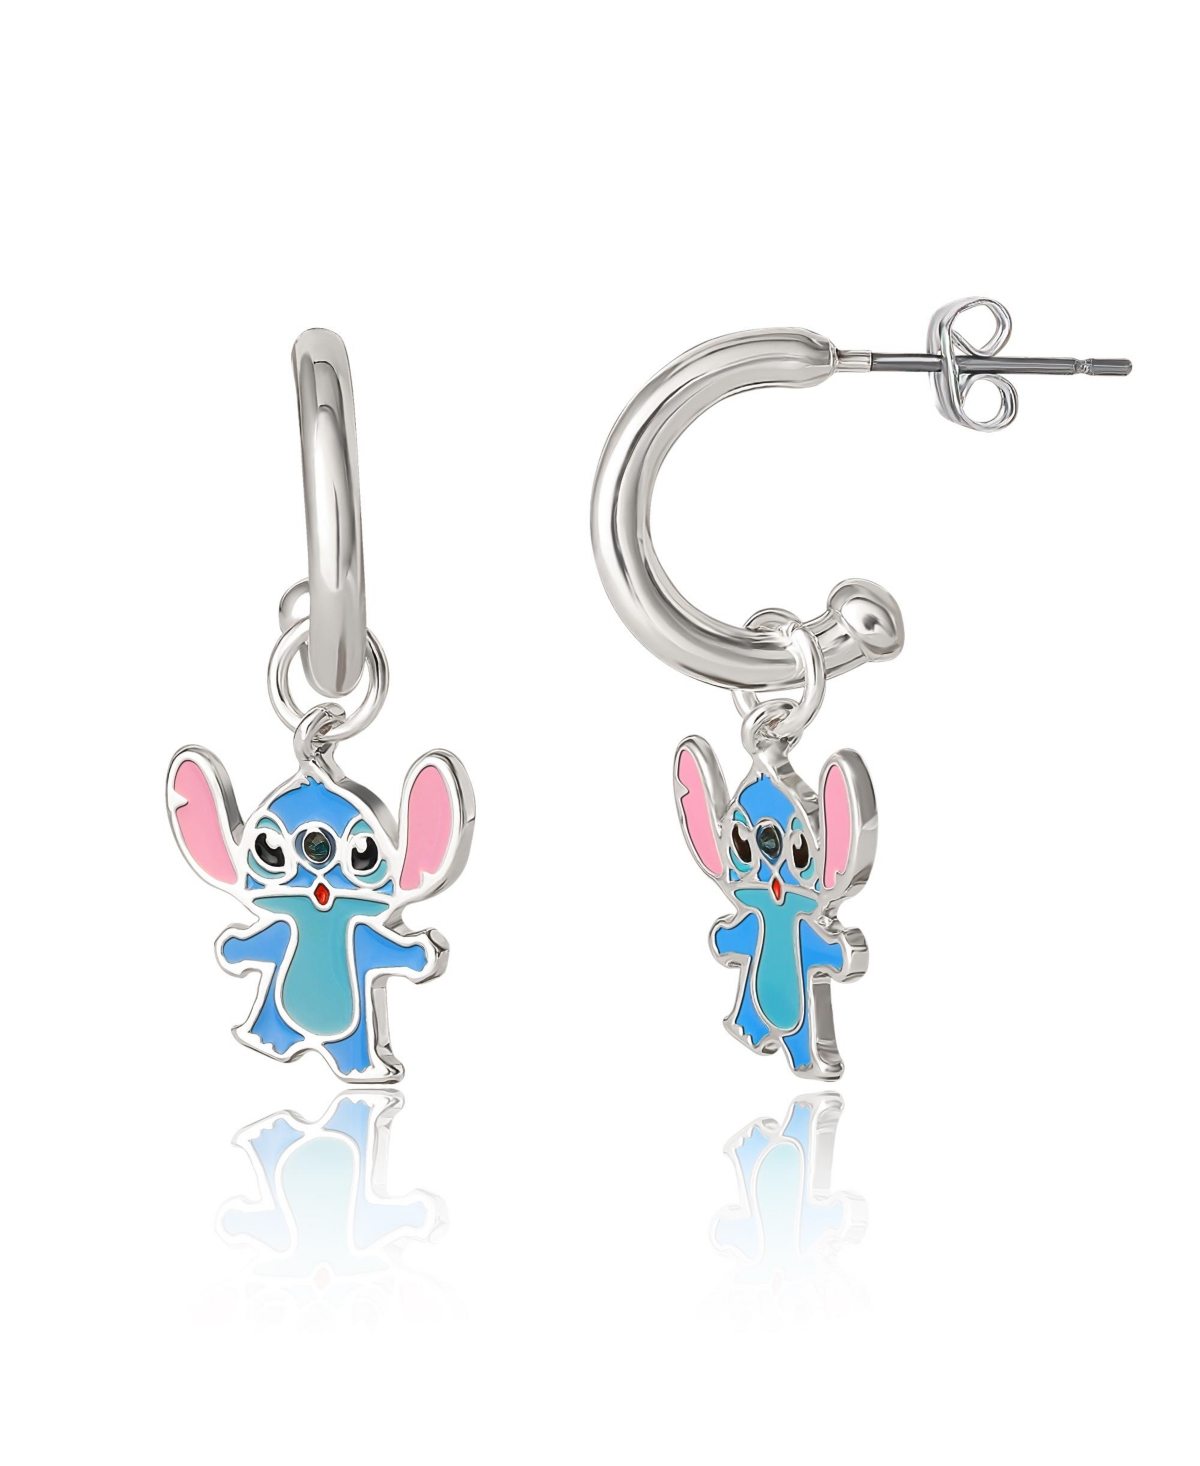 Lilo and Stitch Silver Plated Stitch Drop Hoop Earrings - Silver tone, blue